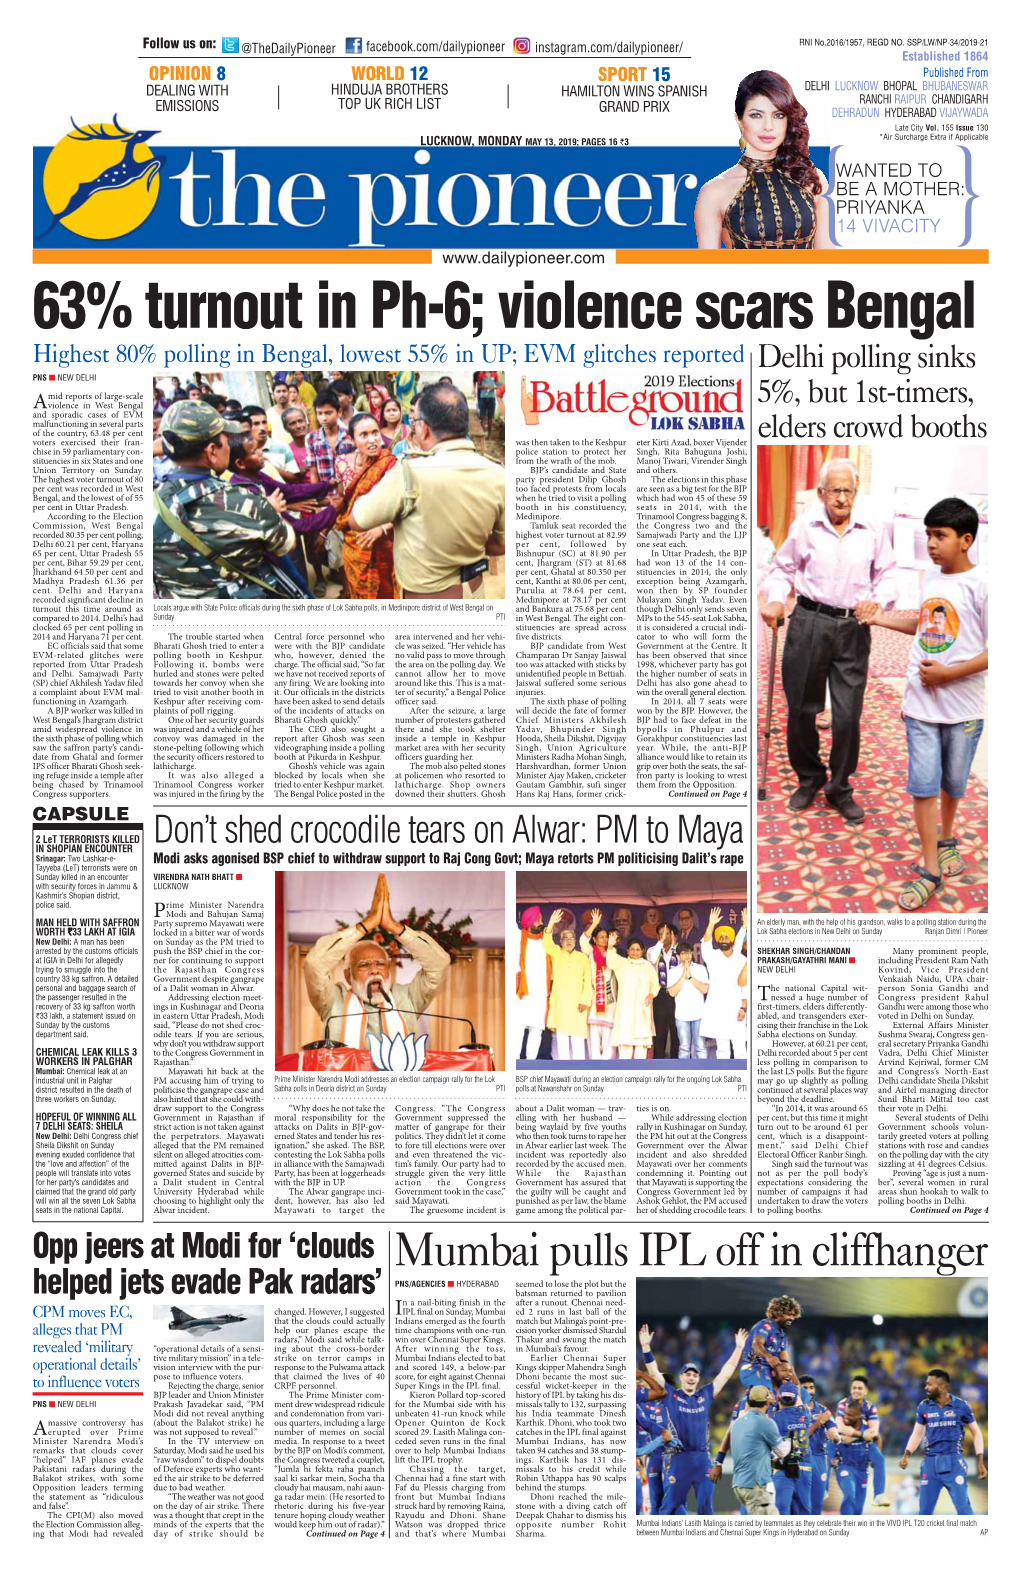 63% Turnout in Ph-6; Violence Scars Bengal Highest 80% Polling in Bengal, Lowest 55% in UP; EVM Glitches Reported Delhi Polling Sinks PNS N NEW DELHI